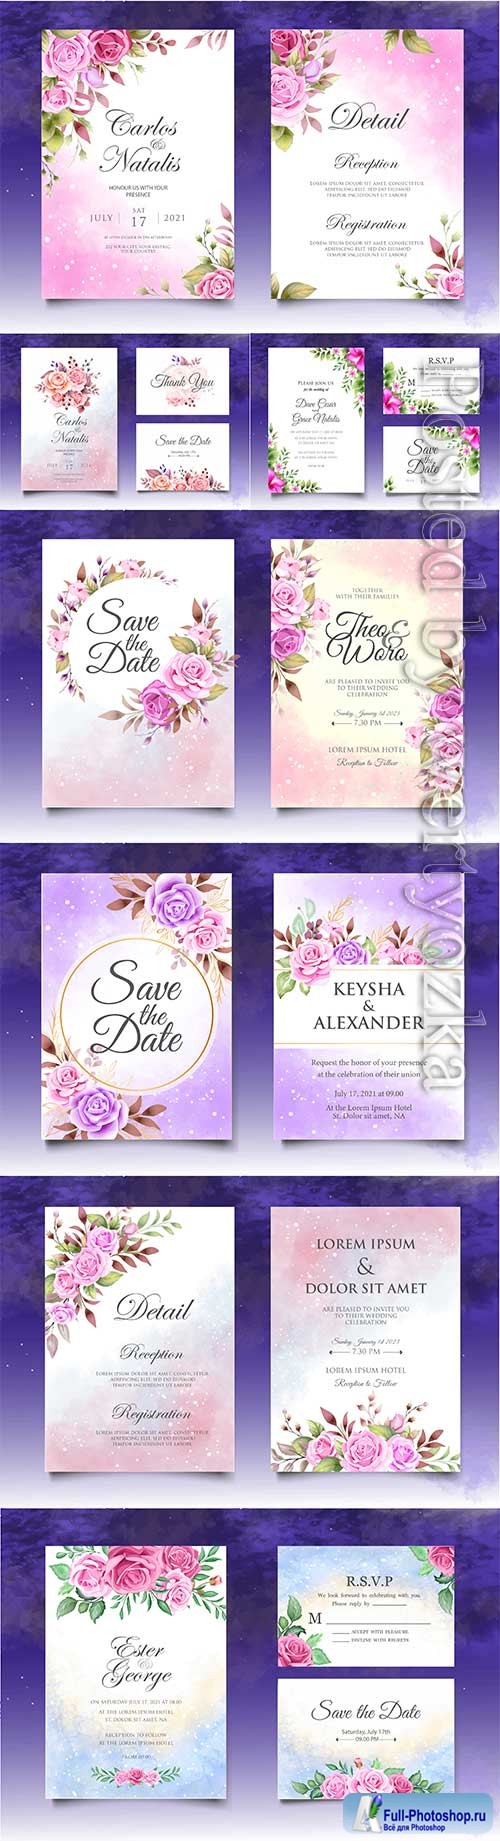 Wedding invitation with red and purple roses